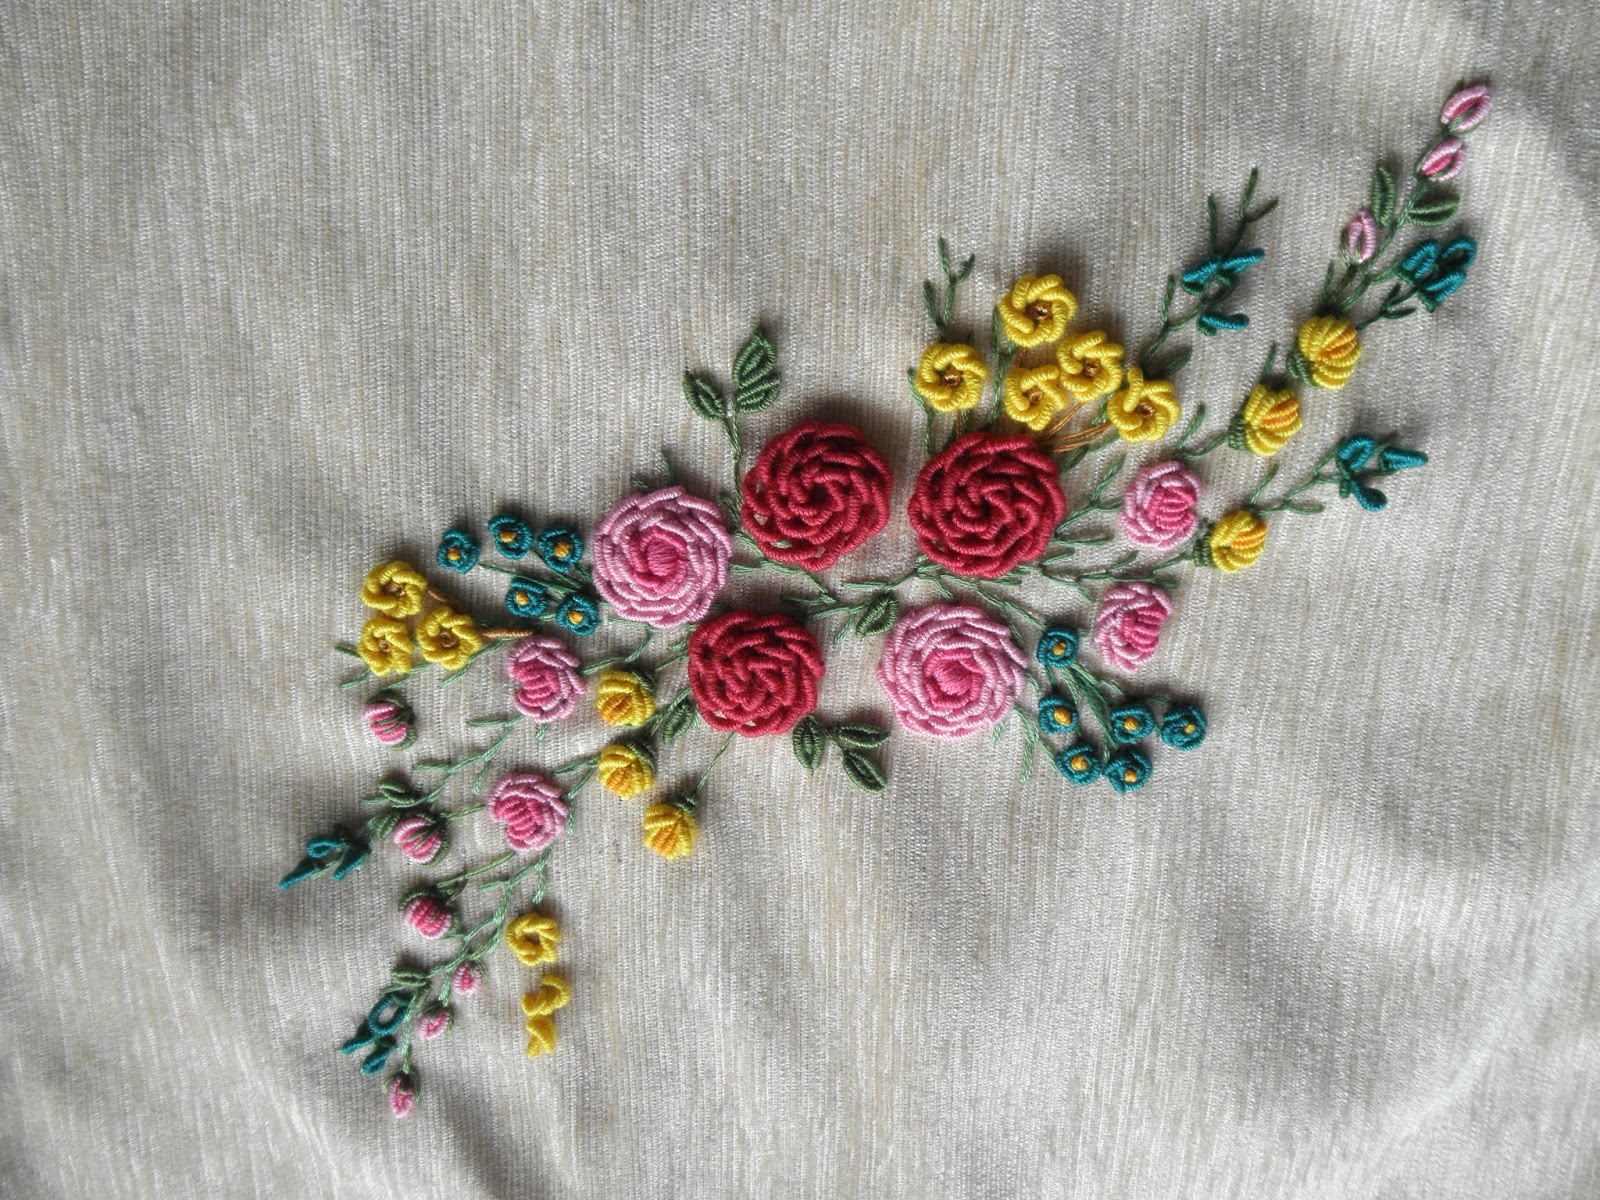 Learn Embroidery Stitches the Easy Way - Embroidery Stitch on HubPages